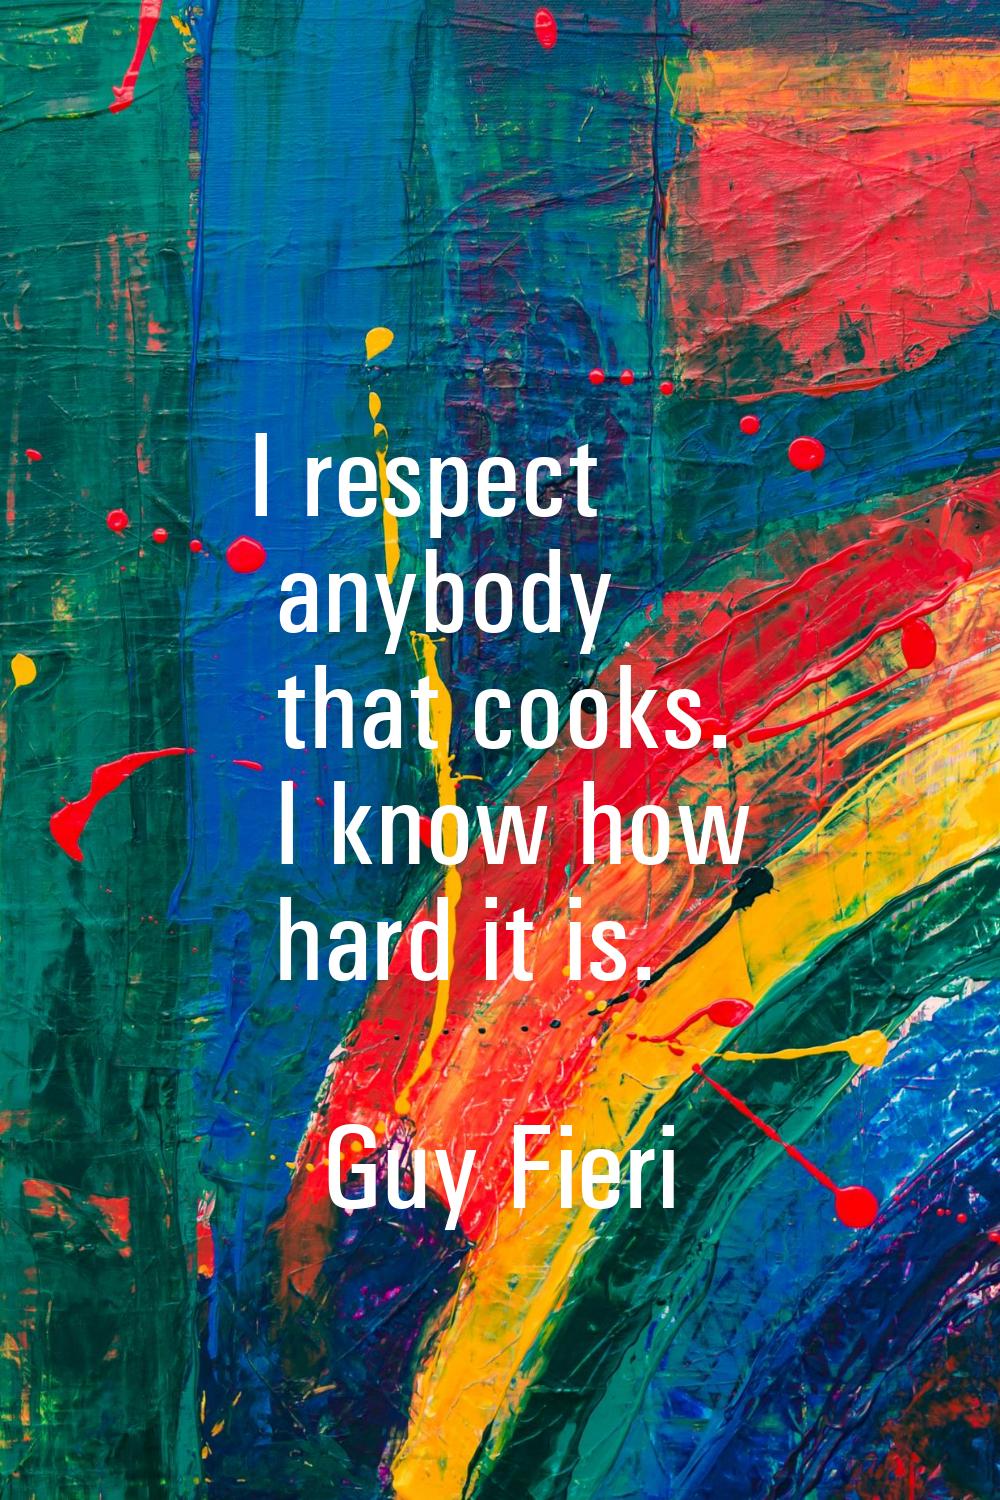 I respect anybody that cooks. I know how hard it is.